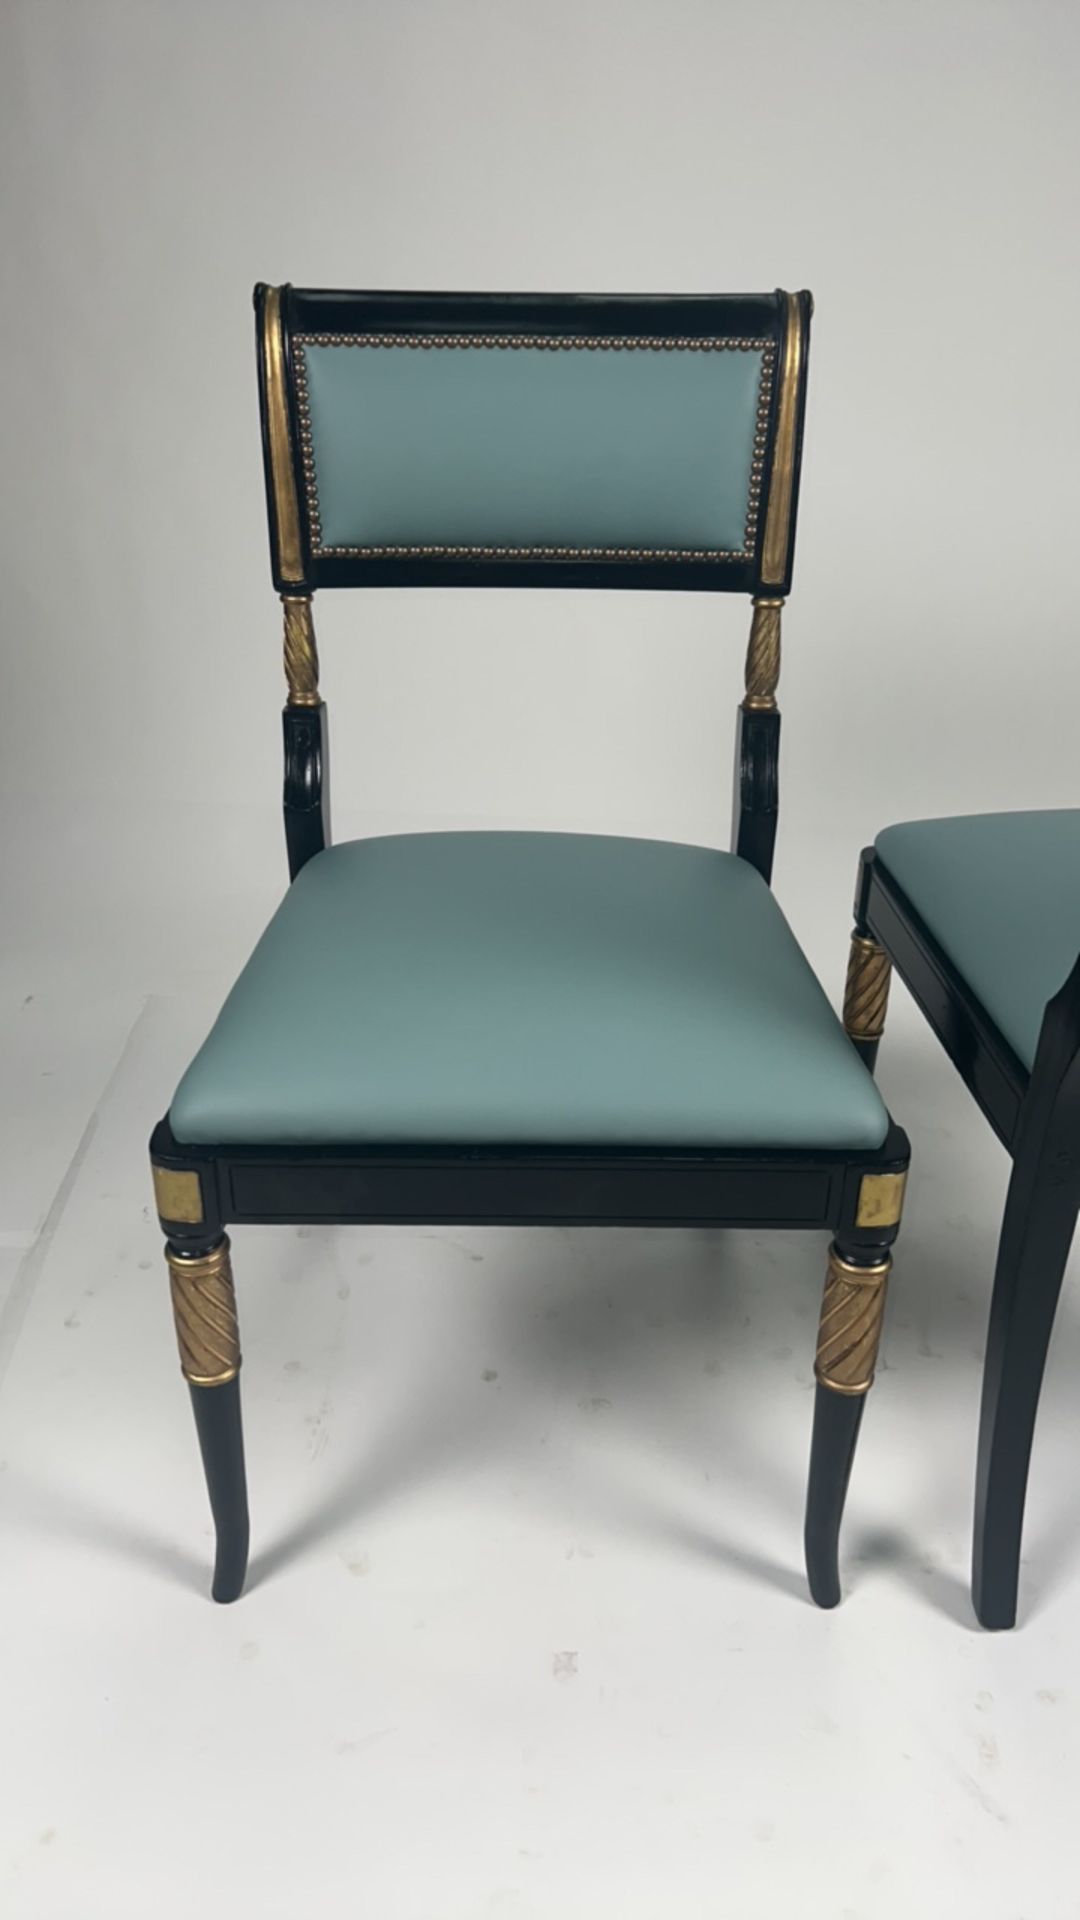 Pair of Wooden Upholstered Chairs